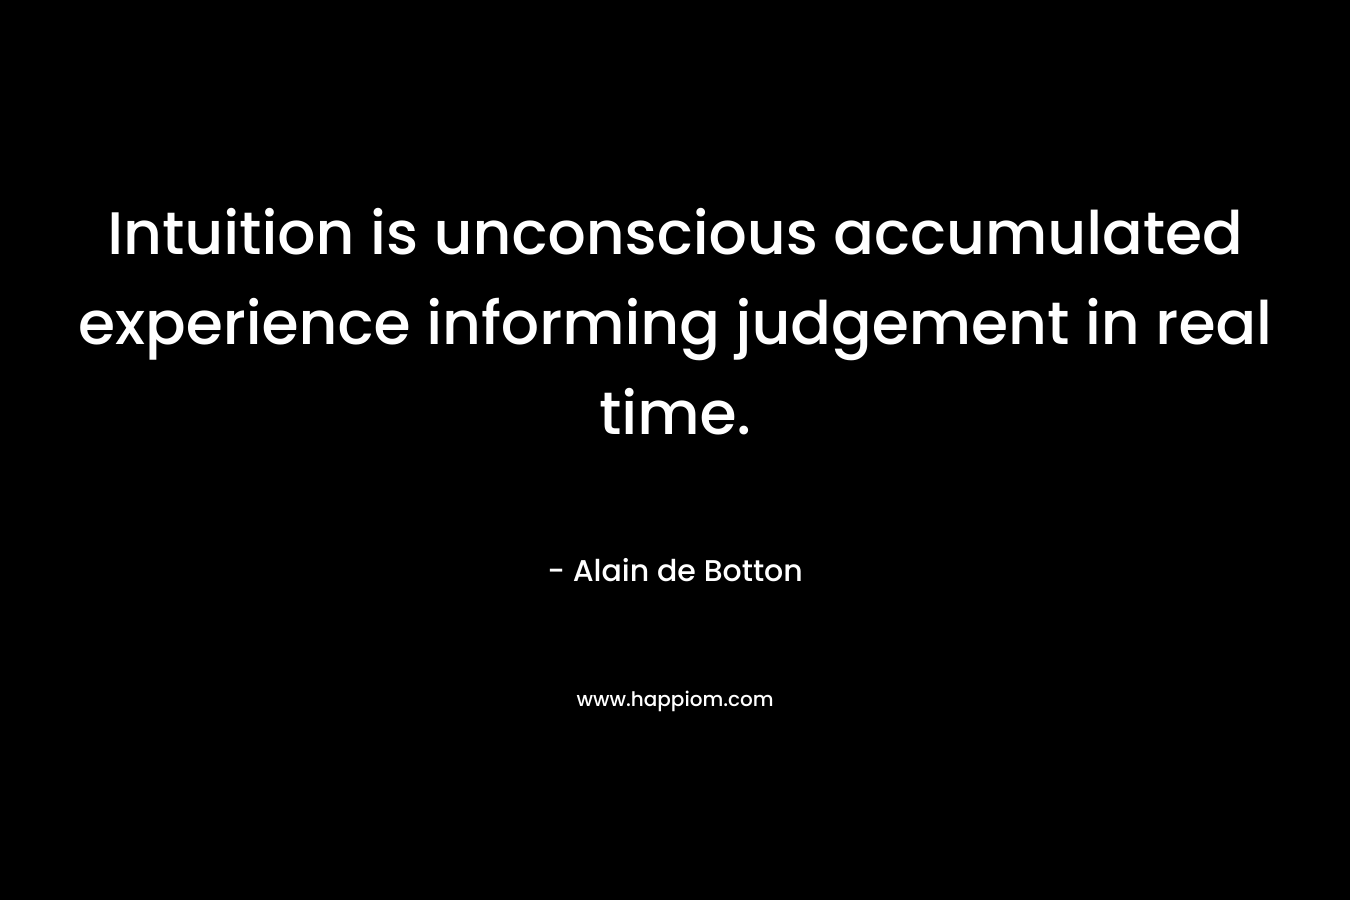 Intuition is unconscious accumulated experience informing judgement in real time. – Alain de Botton